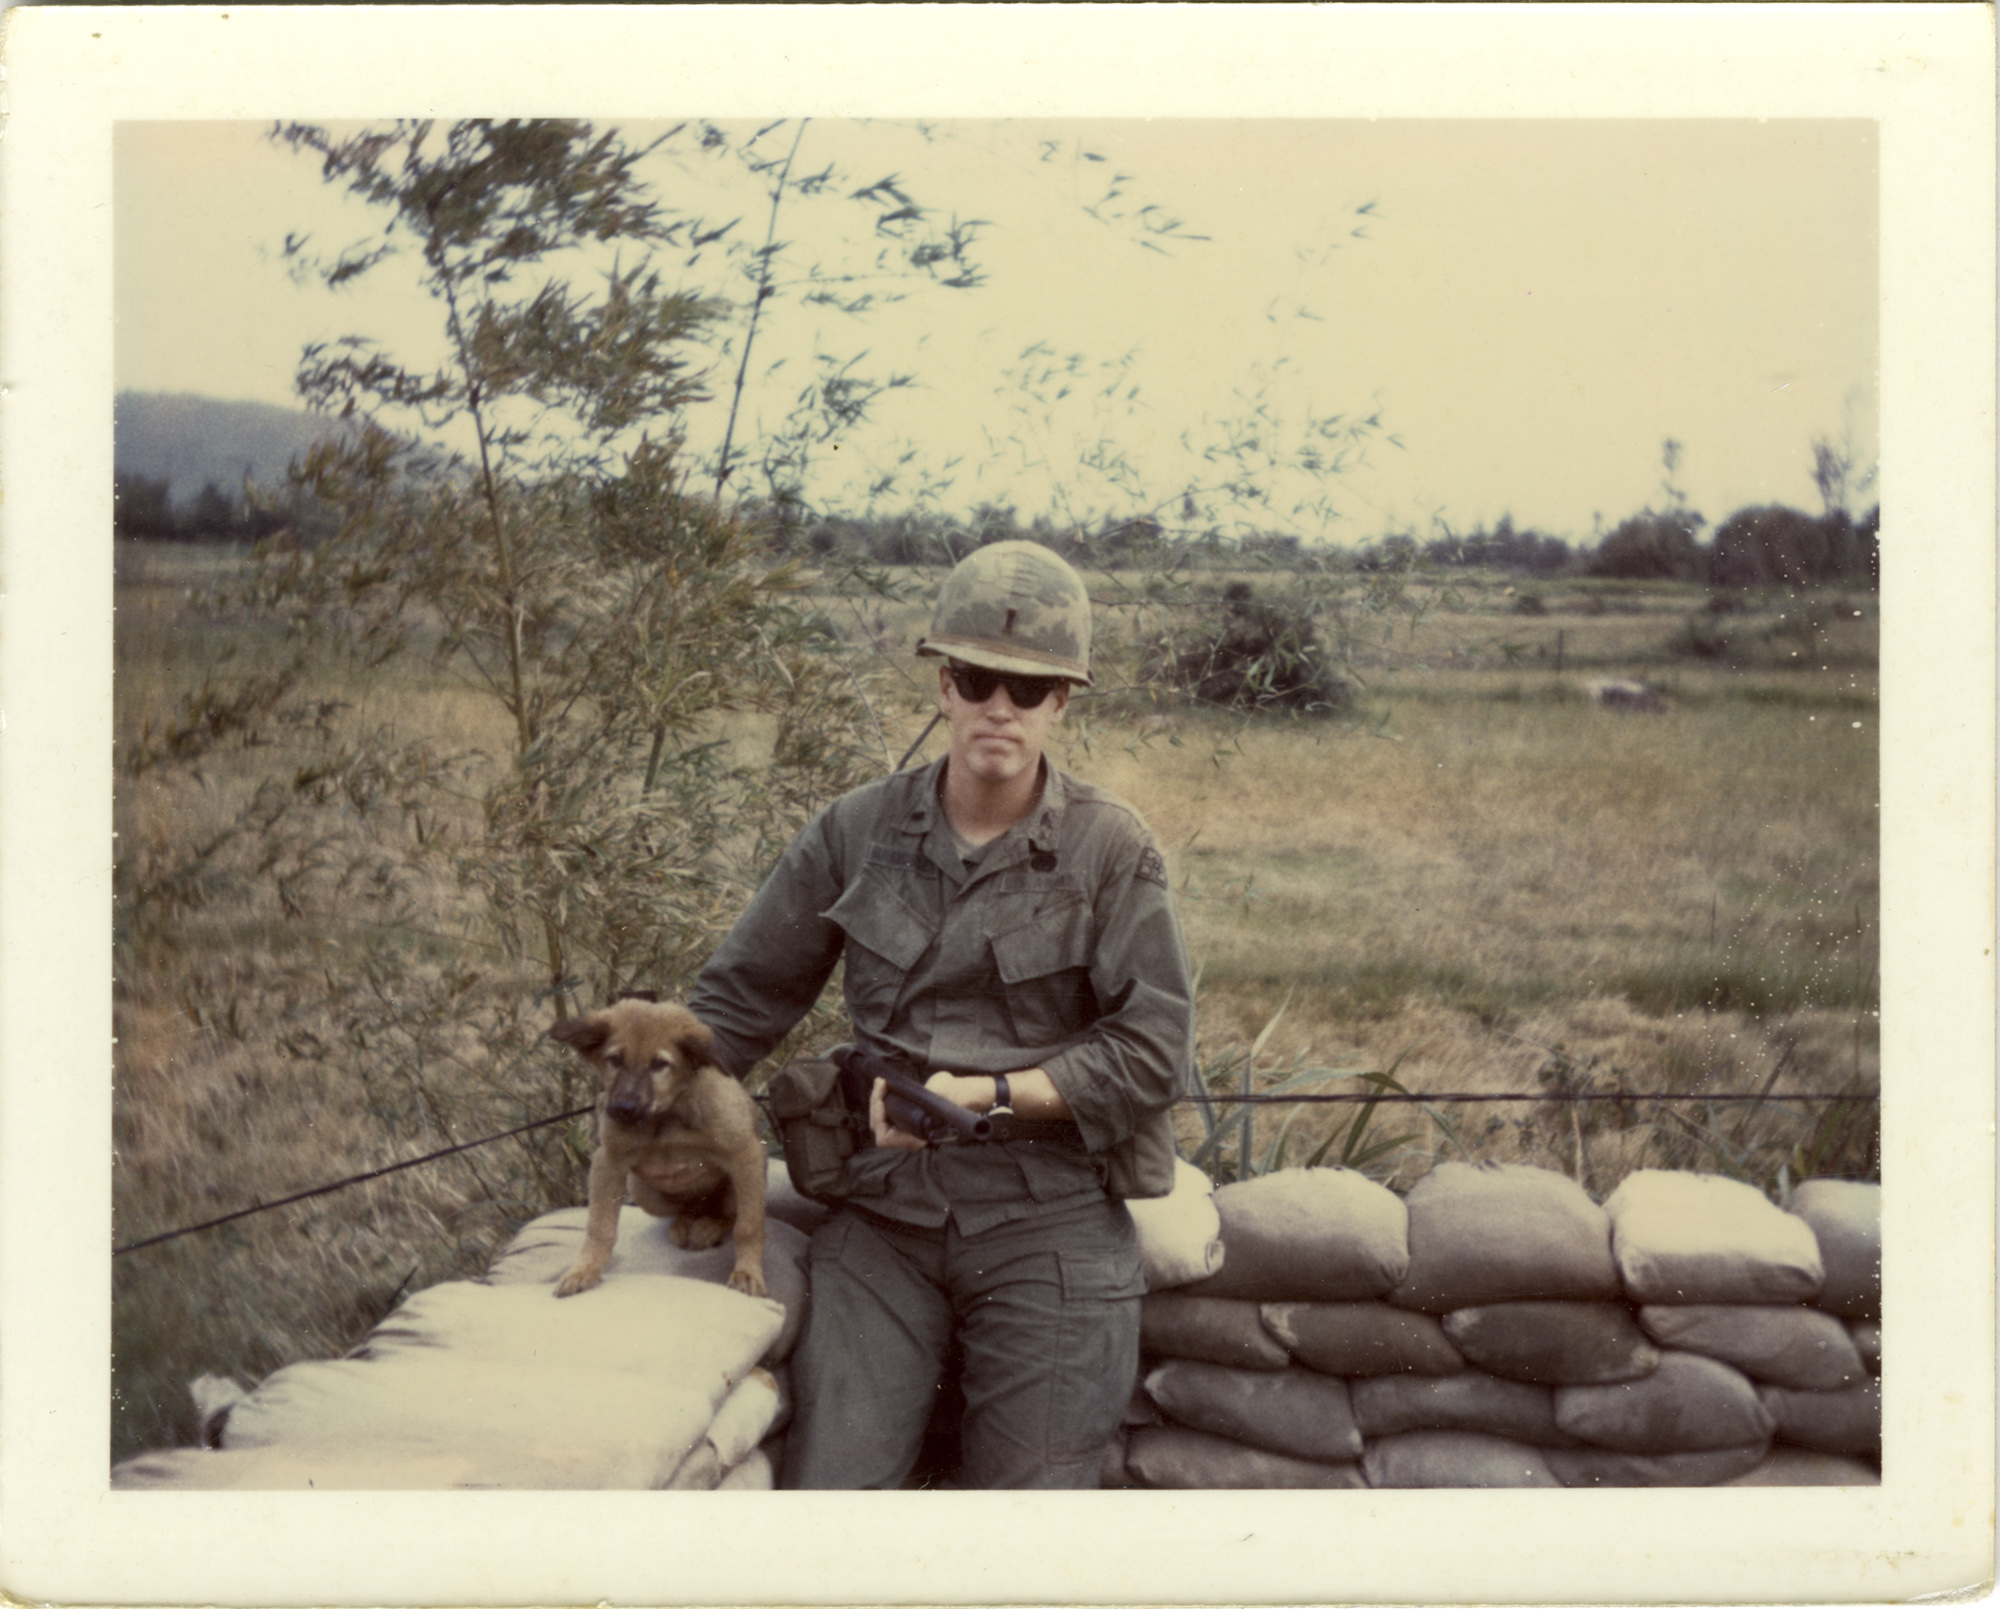 A series of 3 pet dogs brought Lt. Rasmussen a bit of normalcy and joy during his year in Vietnam. ‘Nathaniel’ is pictured here.